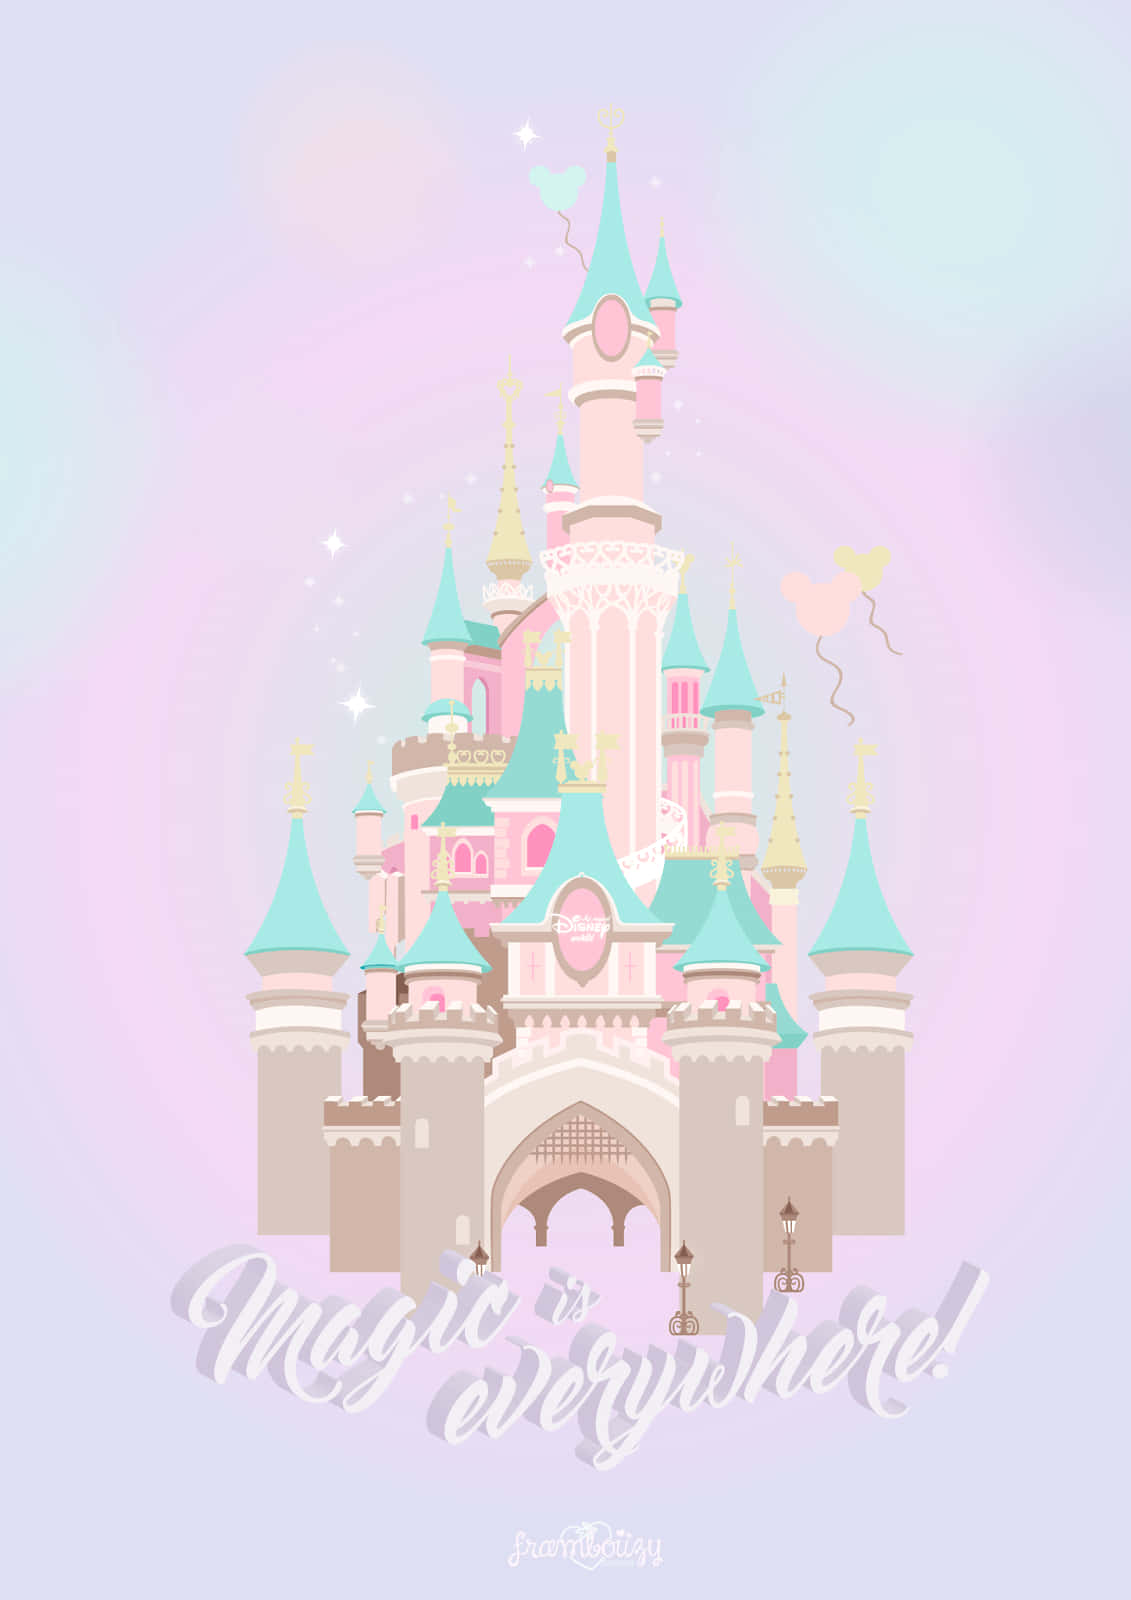 Enjoy the dreamy, whimsical world of Disney with this lovely pastel rendition of its beloved characters. Wallpaper